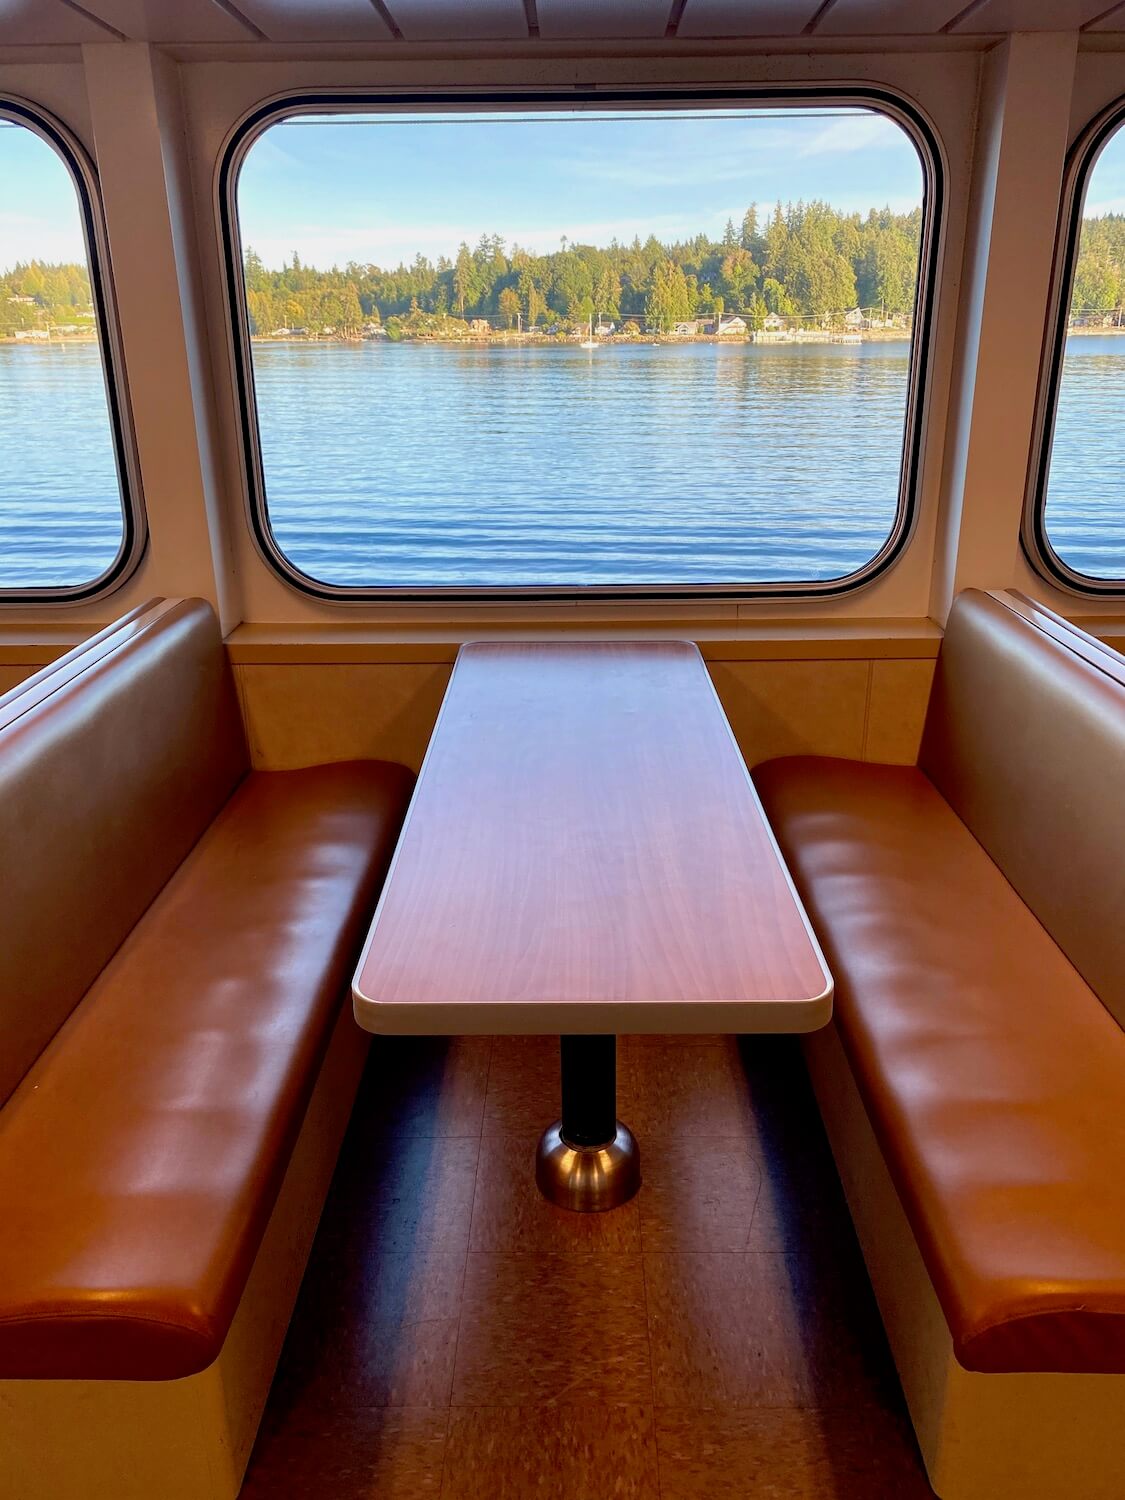 Inside a Washington State Ferry, passenger seating and booths like this one allow views out large picture windows. This shot shows a very clean orange booth with vinyl seating and a faux wood dining table suitable for playing cards or workmen with a computer. The water is gently folding light waves outside and trees and blue sky make up the scenic background.